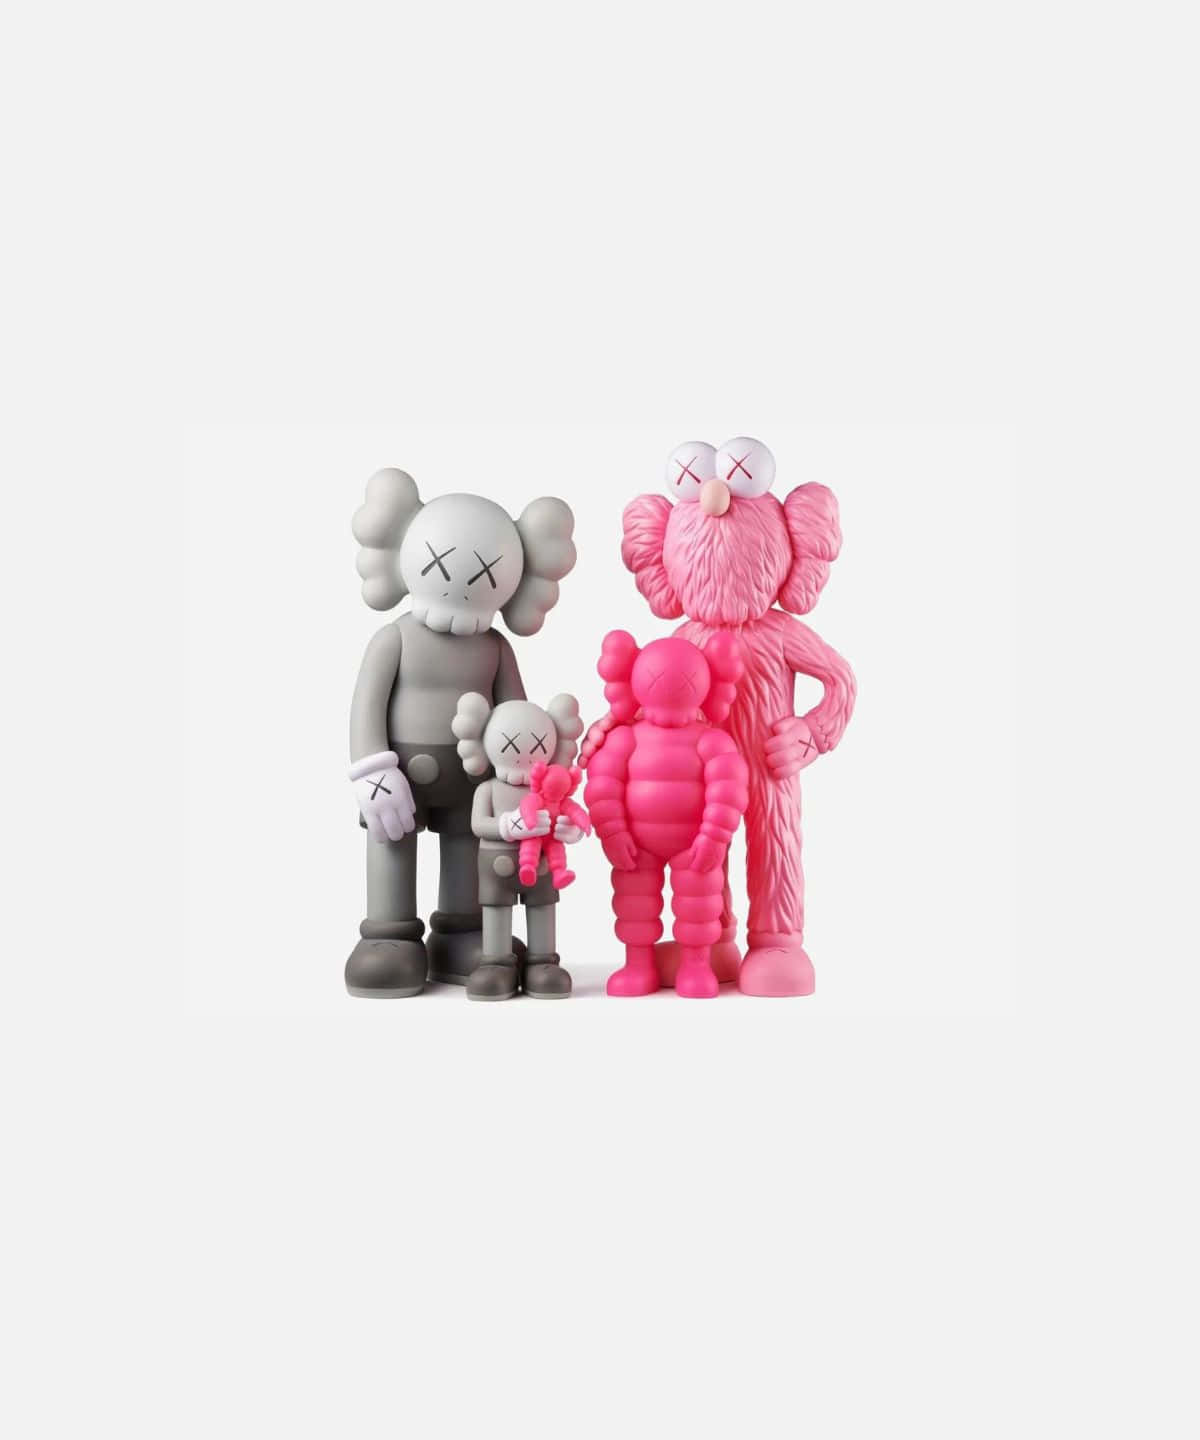 Kaws Figures Gather at a Neon Party Wallpaper